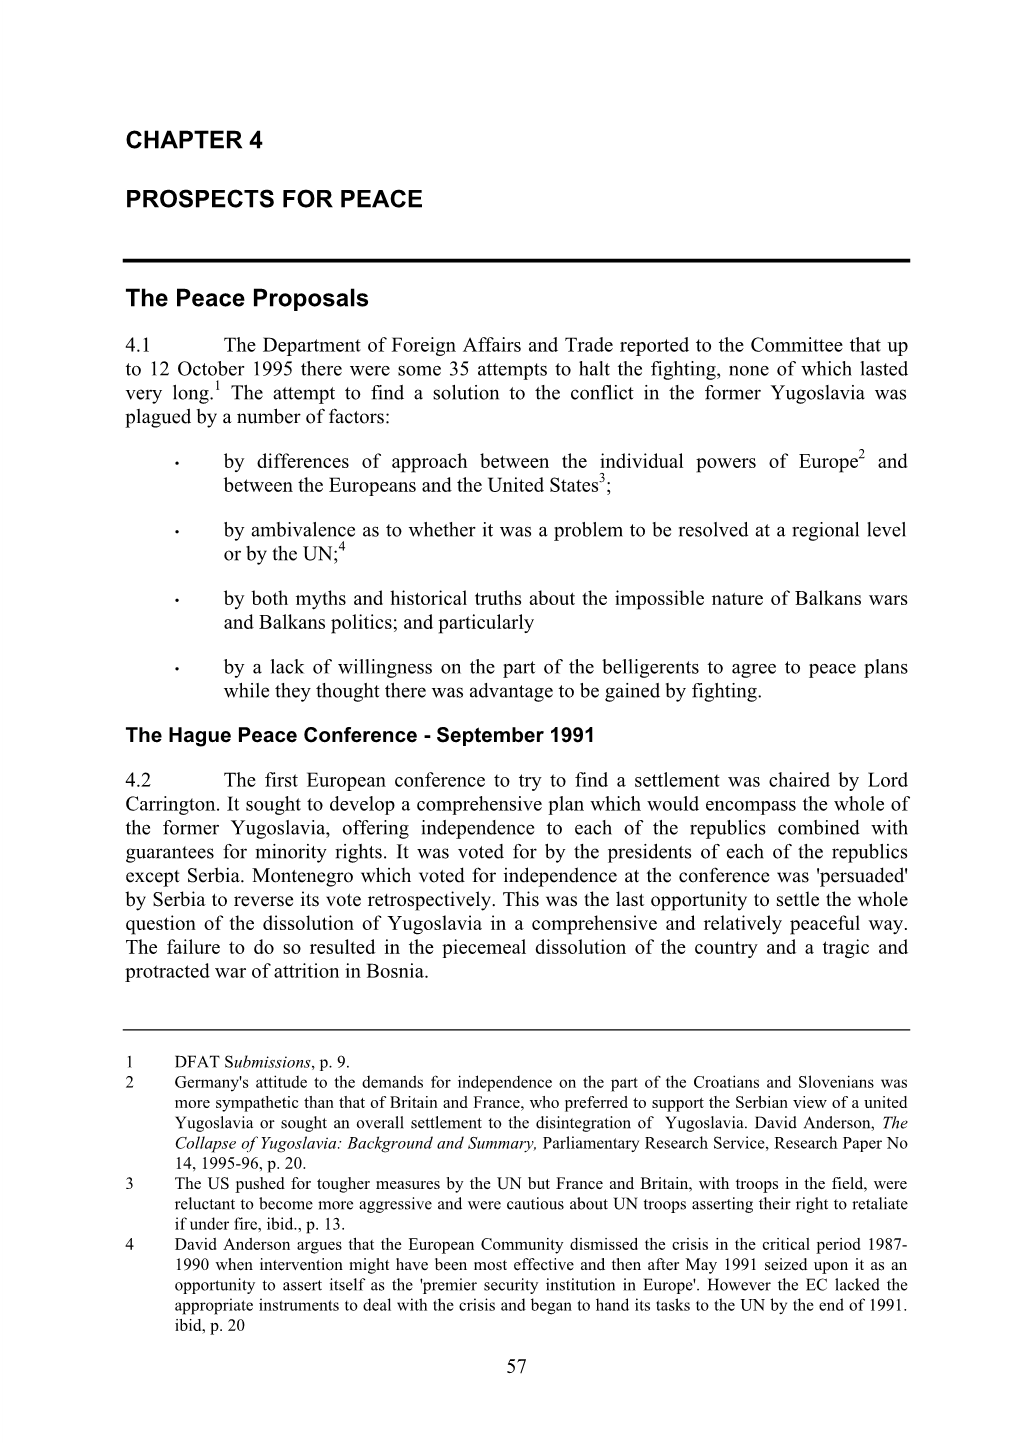 Chapter 4: Prospects for Peace (PDF Format 46KB)